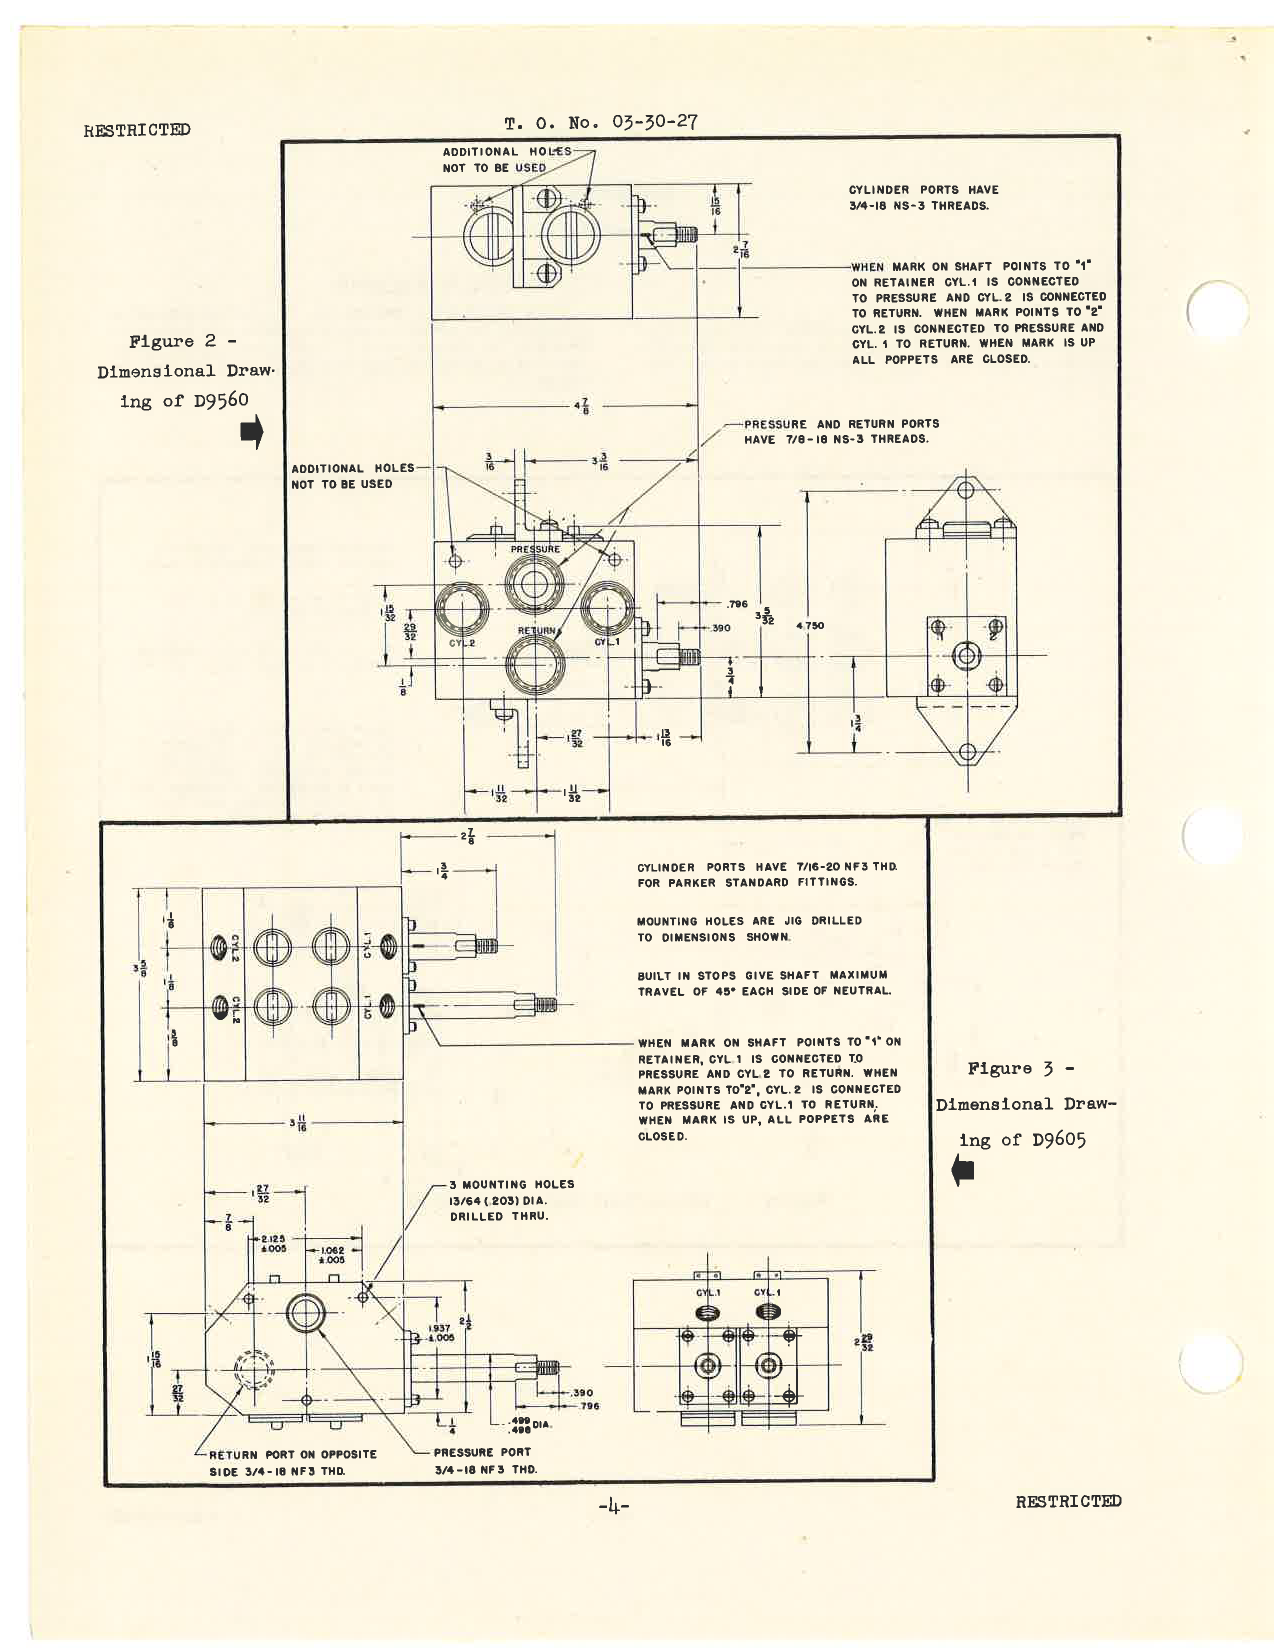 Sample page 6 from AirCorps Library document: Handbook of Instructions with Parts Catalog for Hydraulic Selector Valves